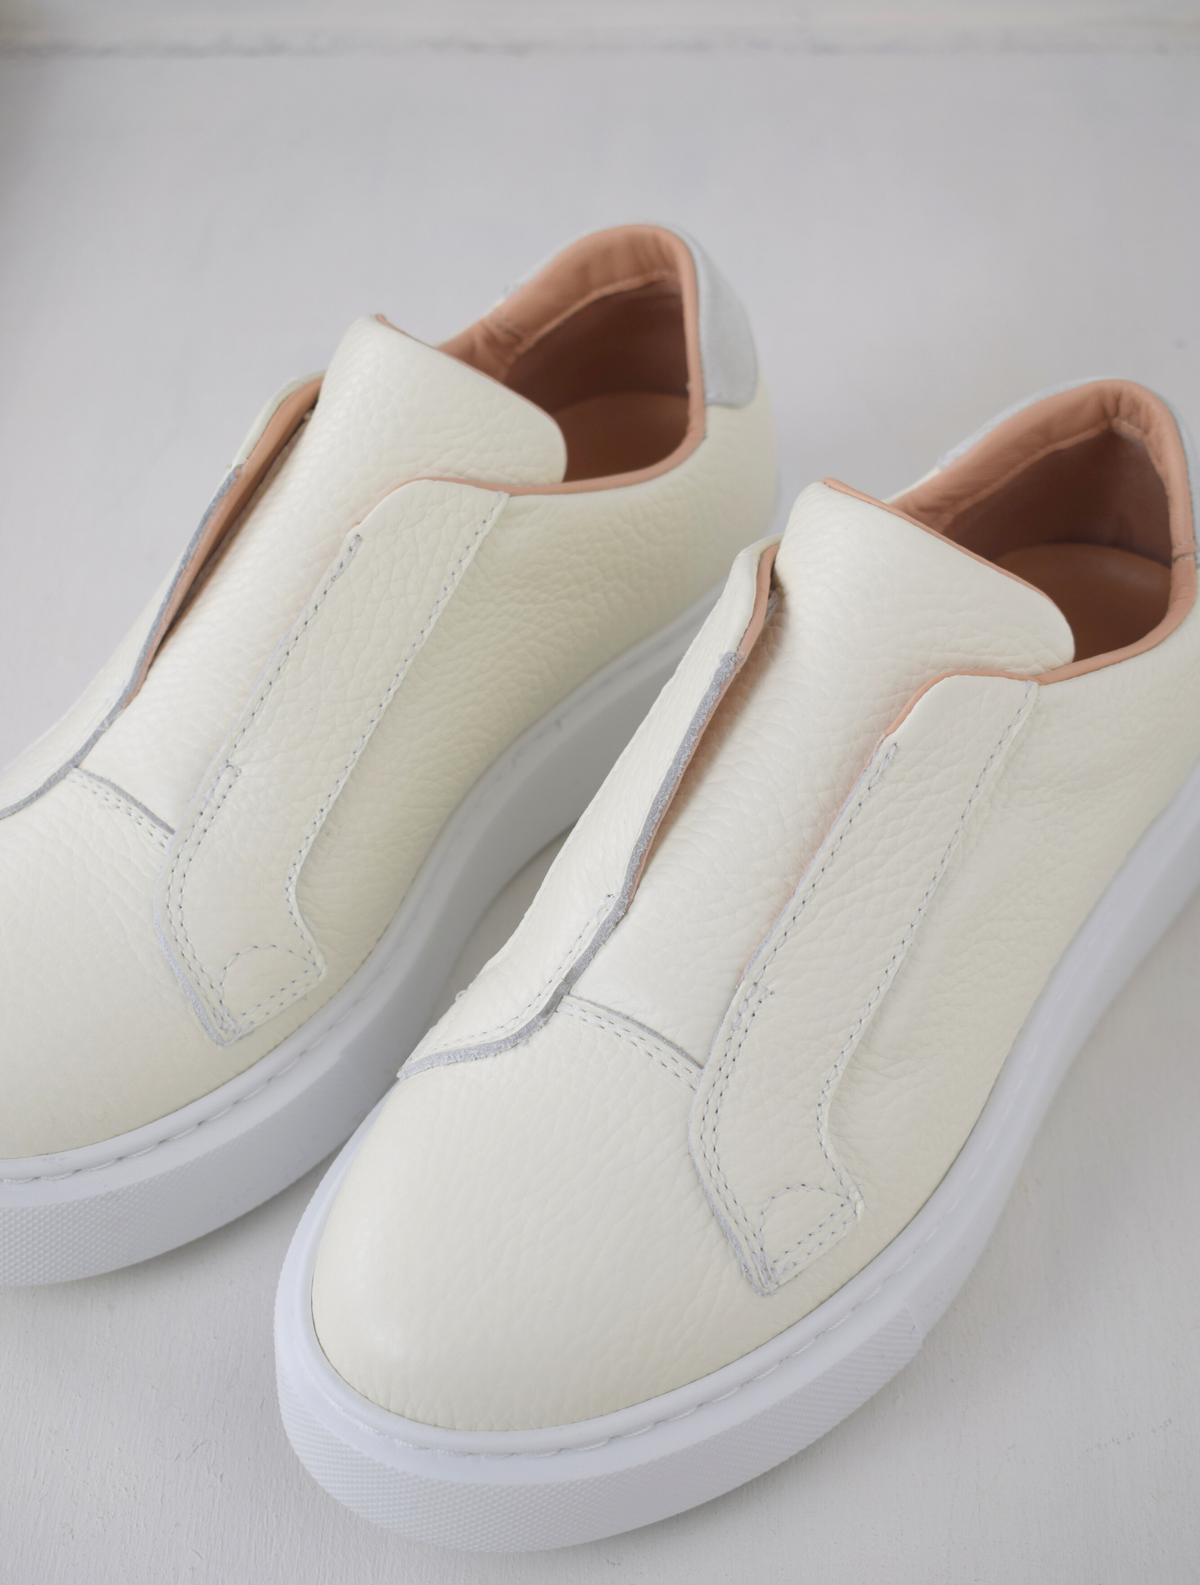 White platform trainers will elasticated side panels to make them easy to pull on